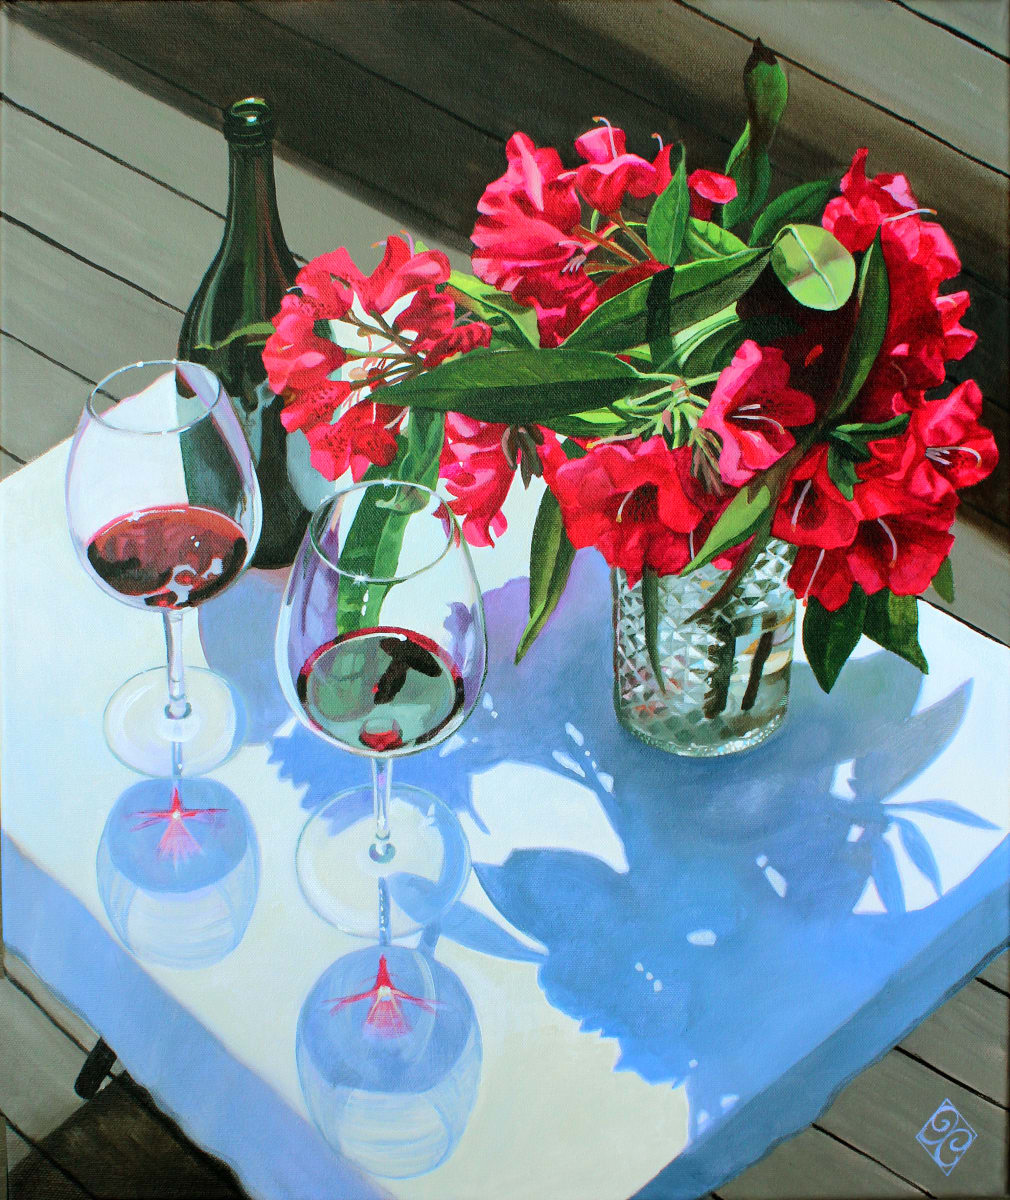 Rhapsody in red by Joan Chamberlain  Image: Red rhododendron blossoms alongside glasses of cabernet wine.